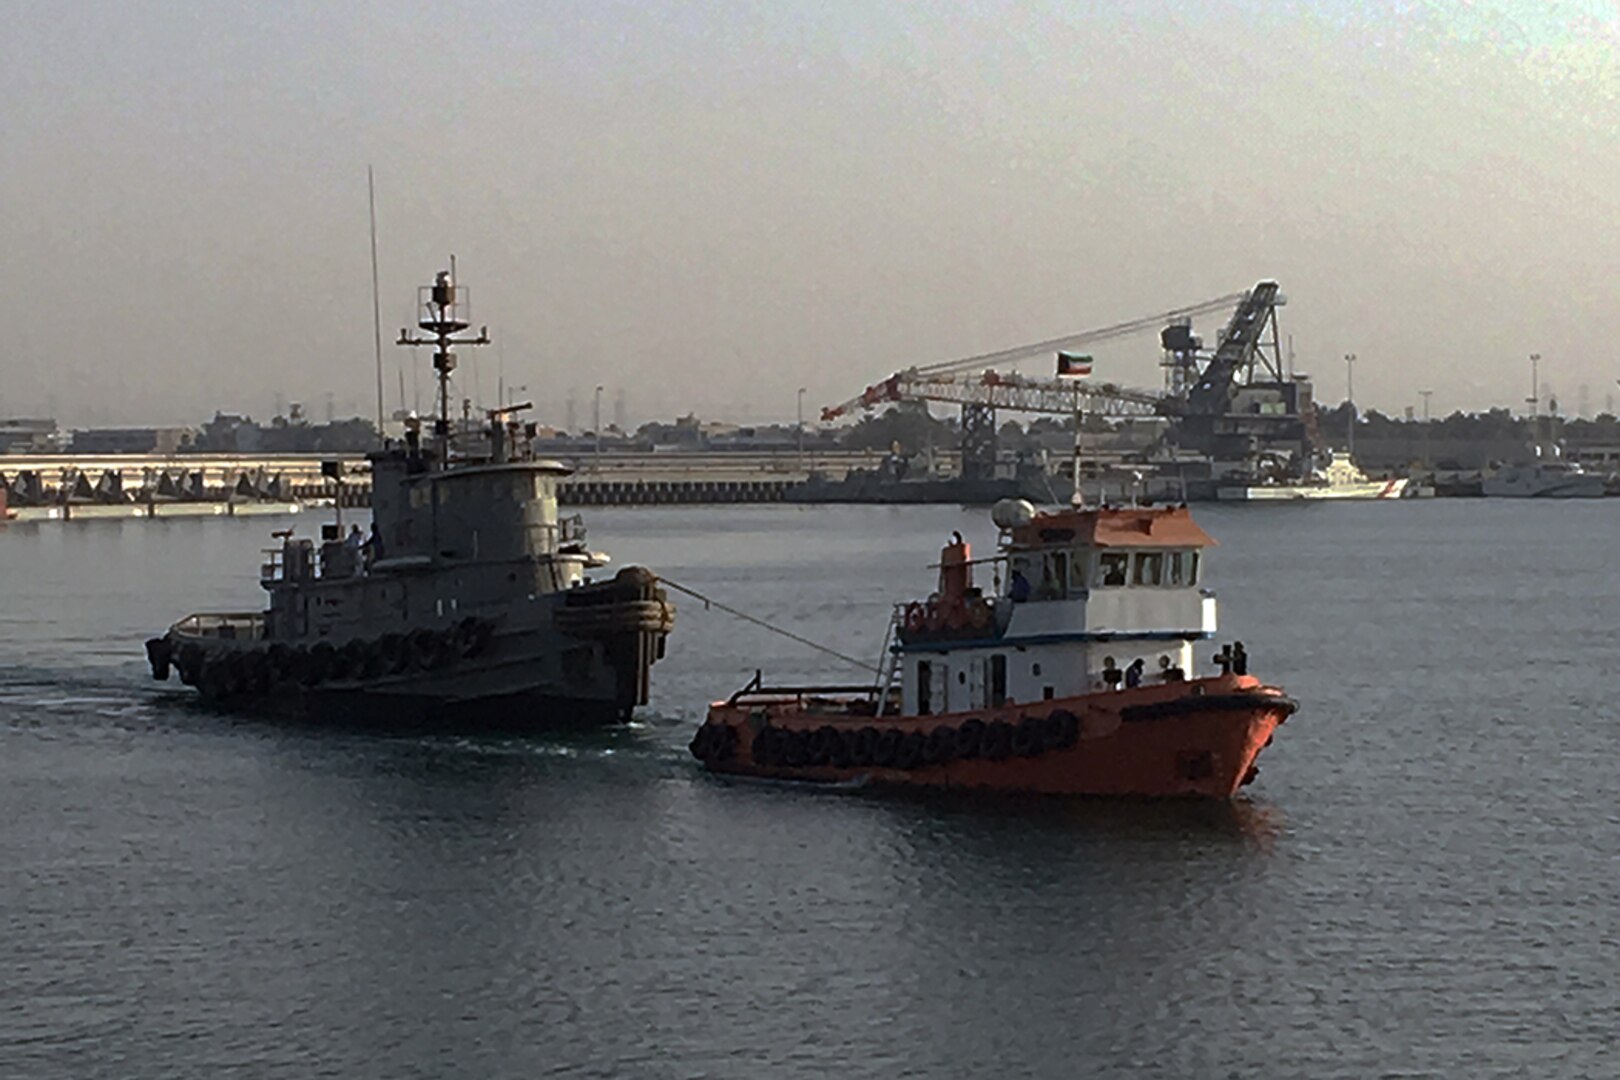 A contract tug begins its 12-hour journey from Kuwait Naval Base to the port of Doha, Qatar, with the retired Army tugboat in tow.